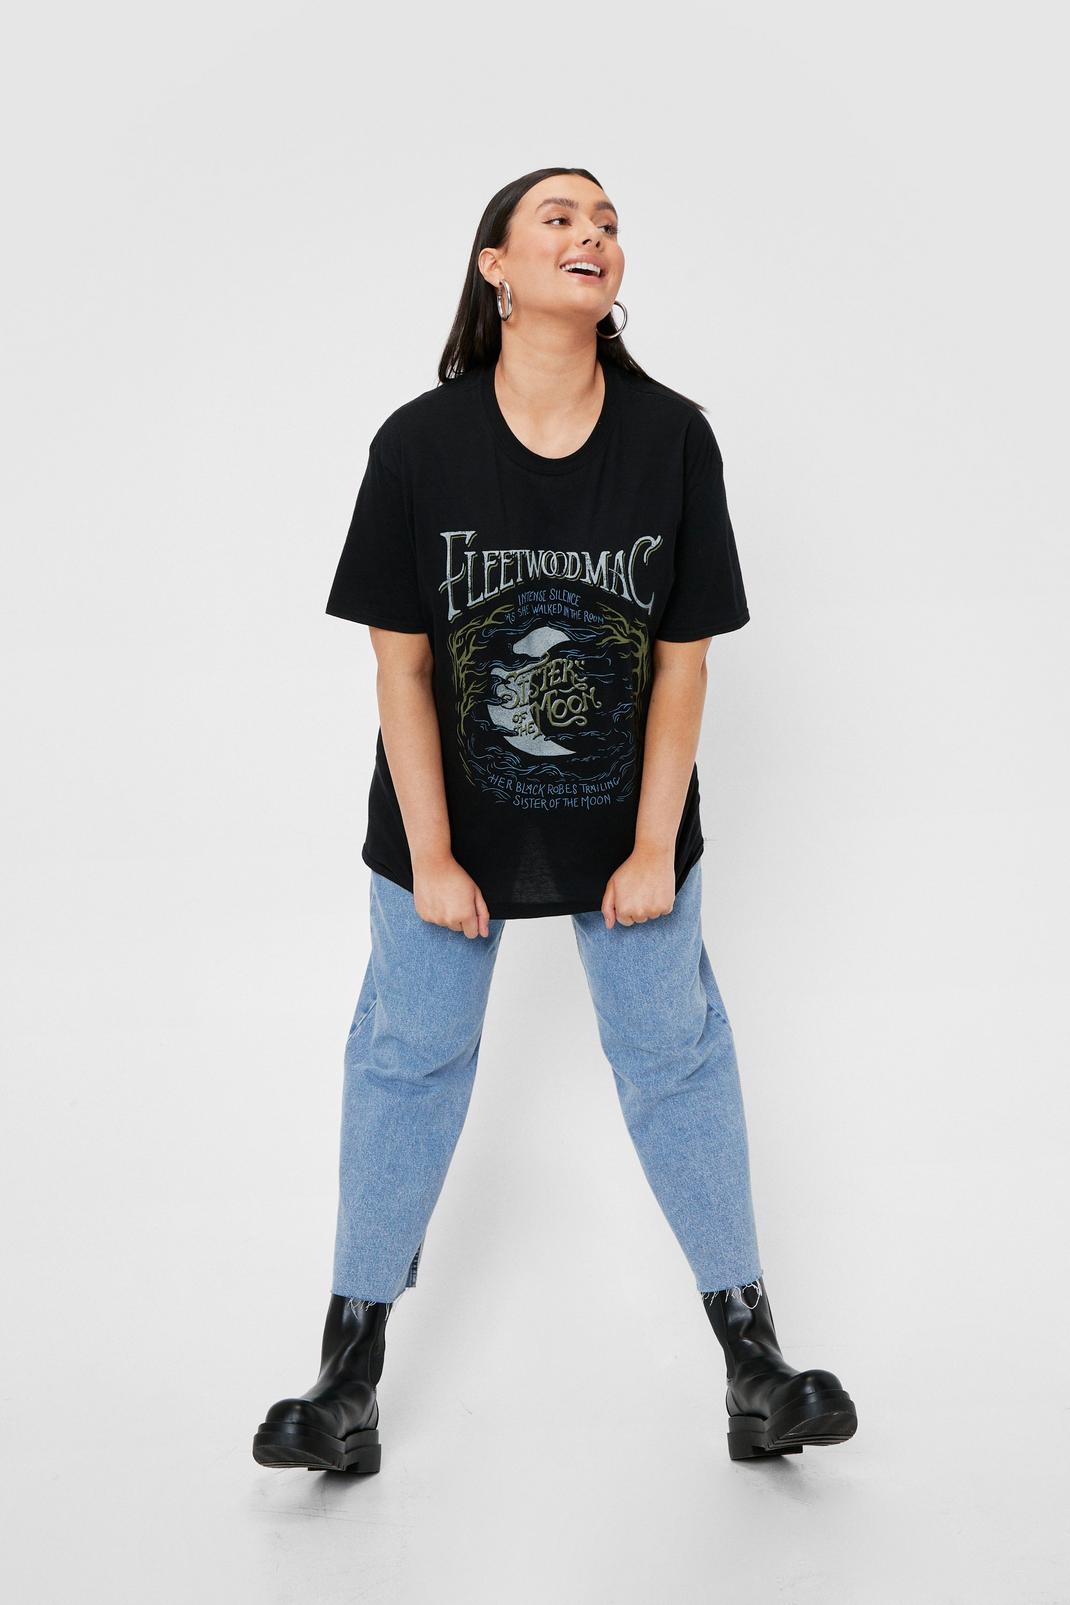 105 Plus Size Fleetwood Mac Graphic T-Shirt image number 2